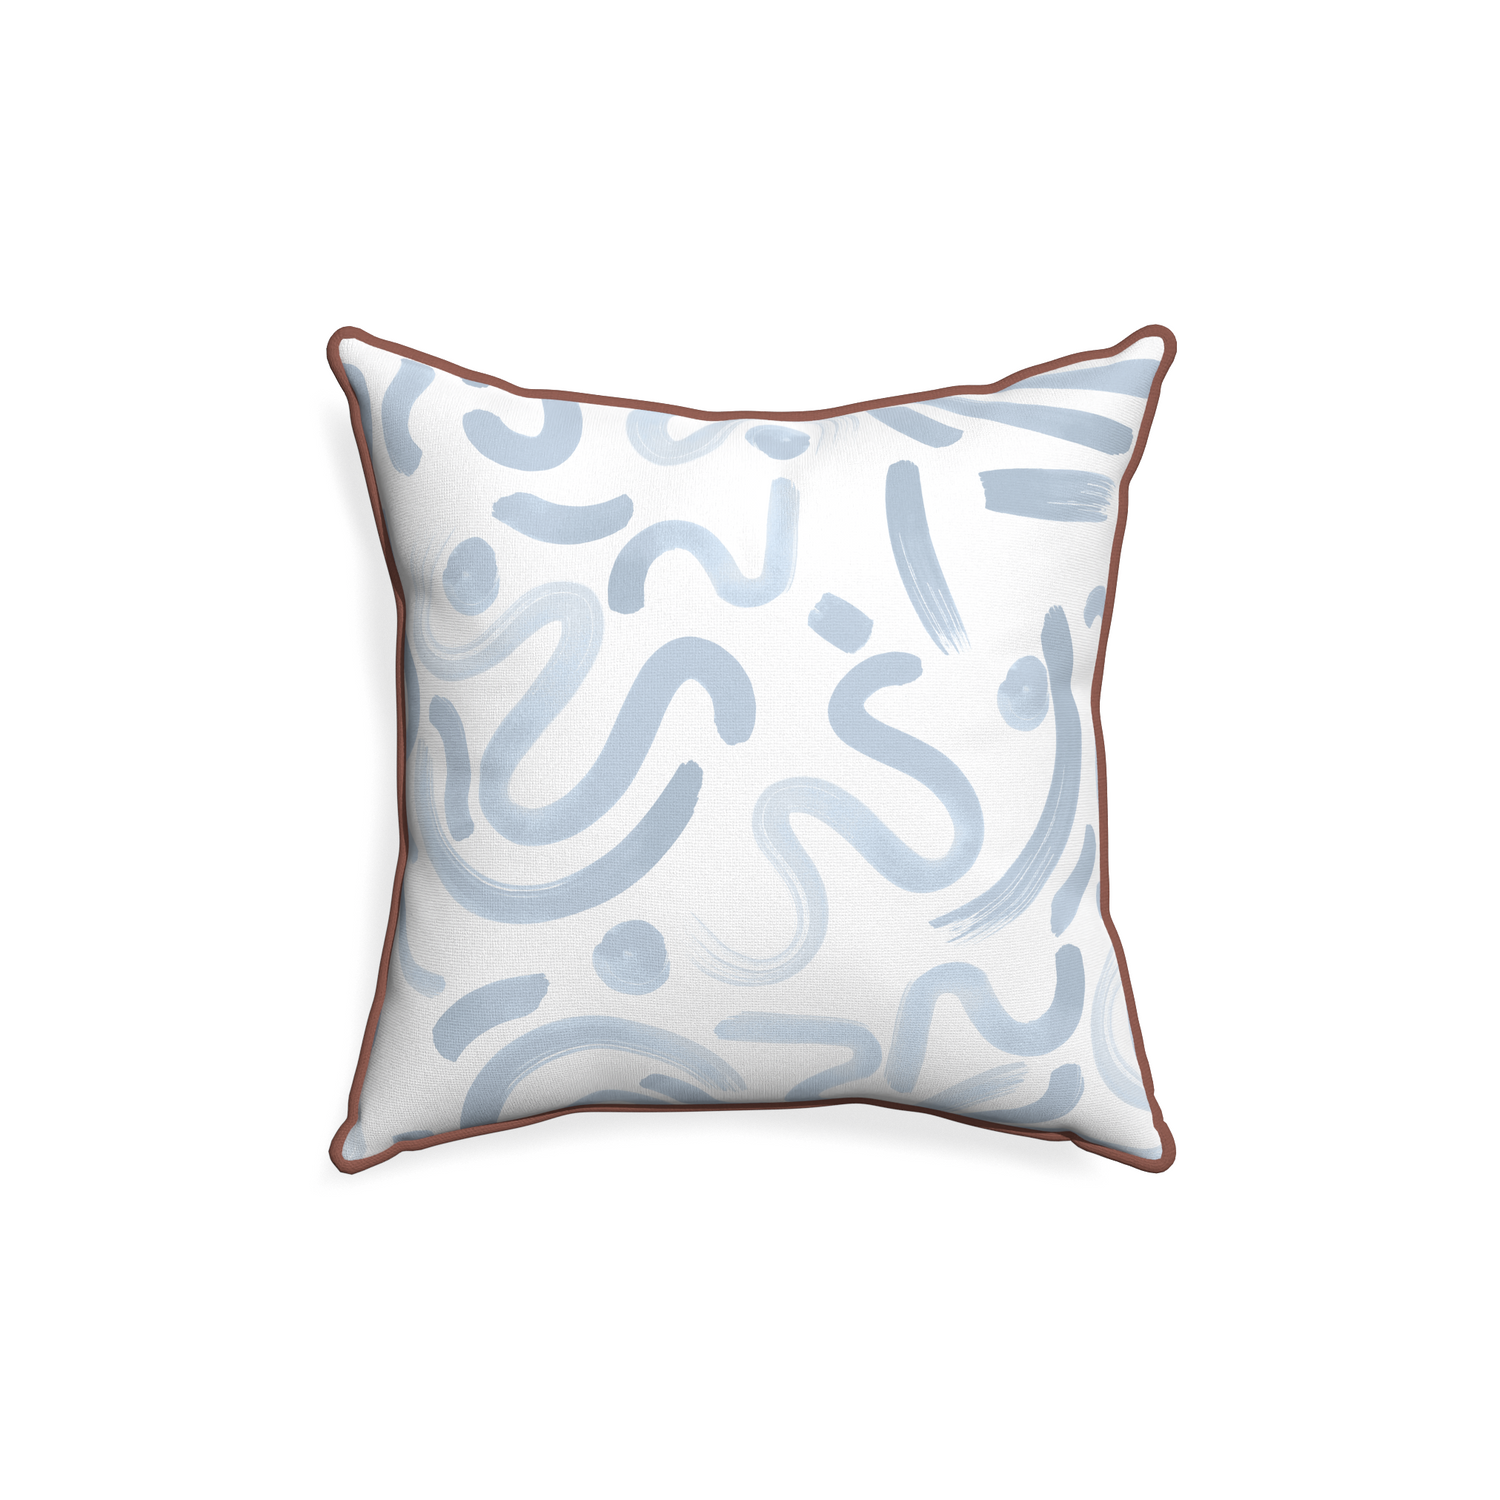 18-square hockney sky custom pillow with w piping on white background